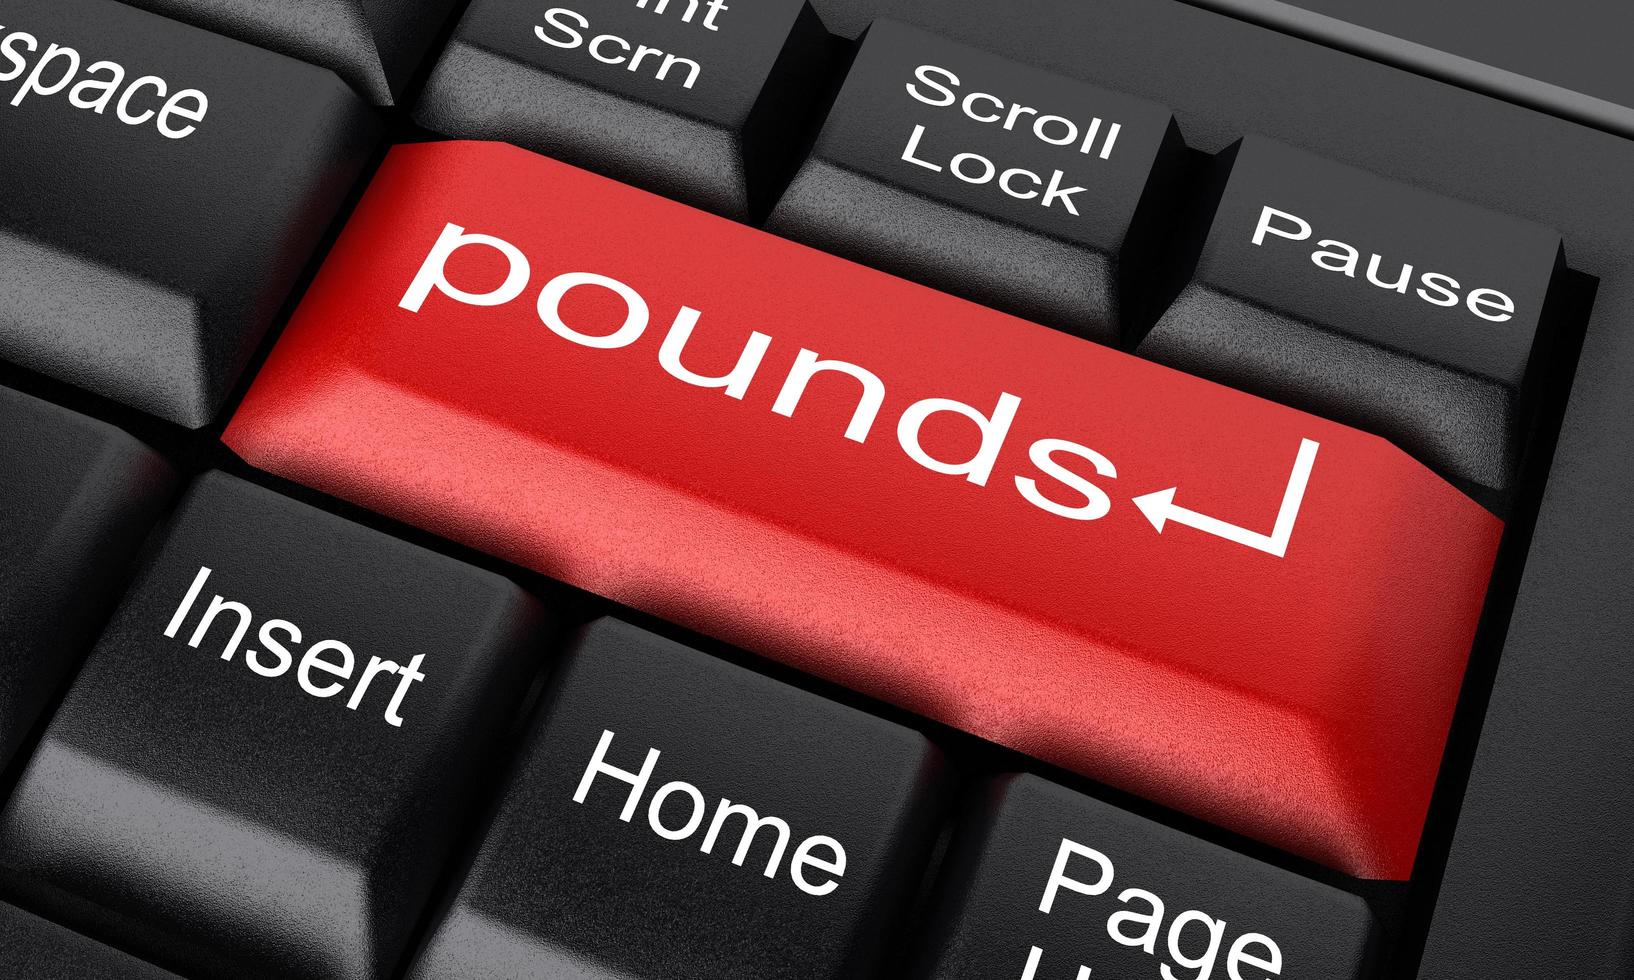 pounds word on red keyboard button photo